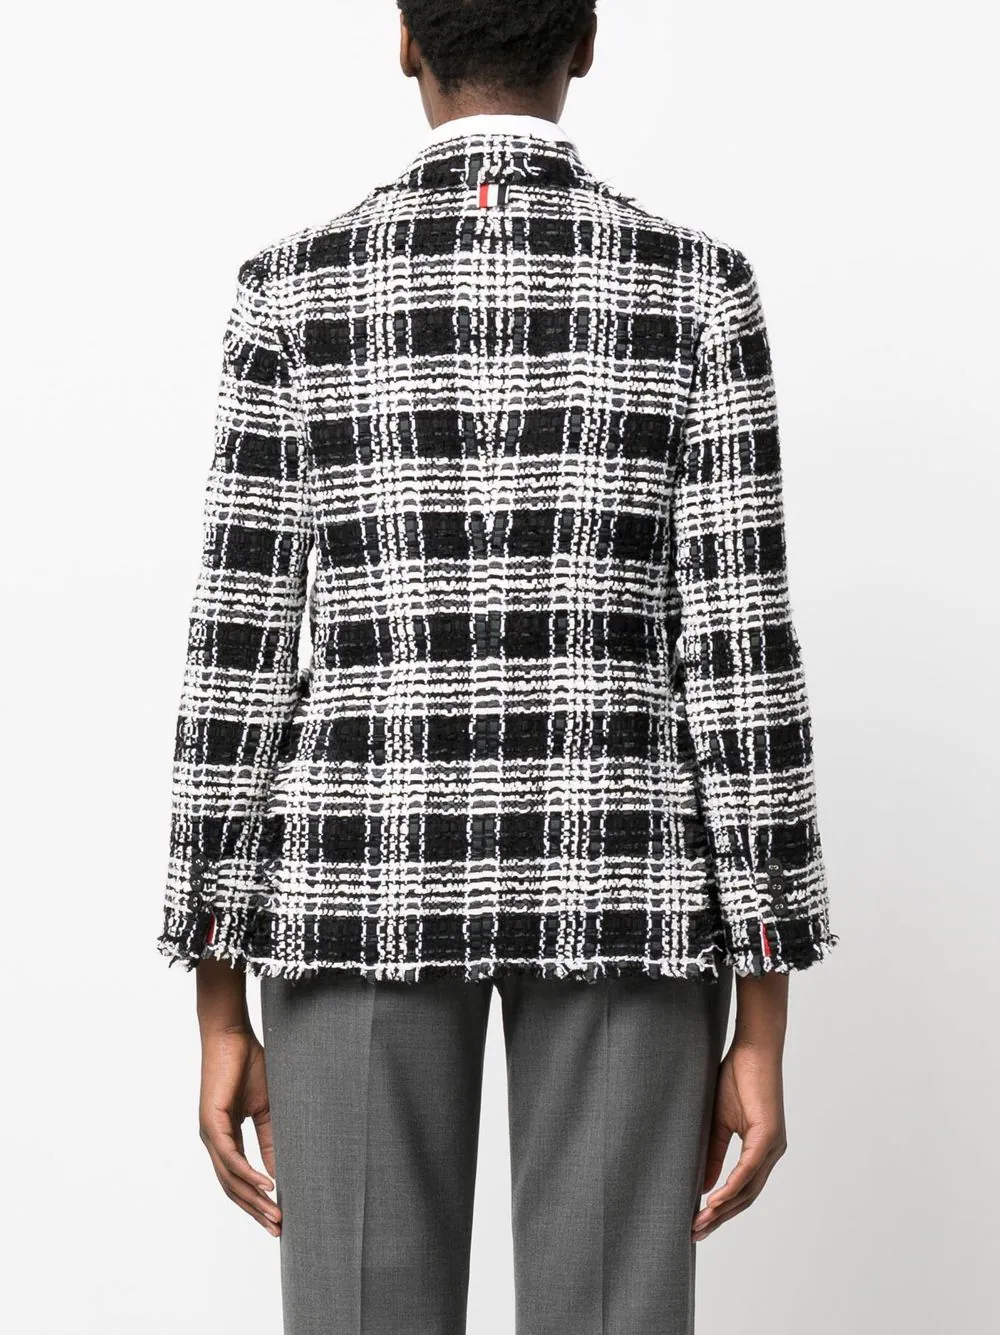 THOM BROWNE Women Classic Sportcoat W/ Fray Finishing In Pow Check Chenille Tweed